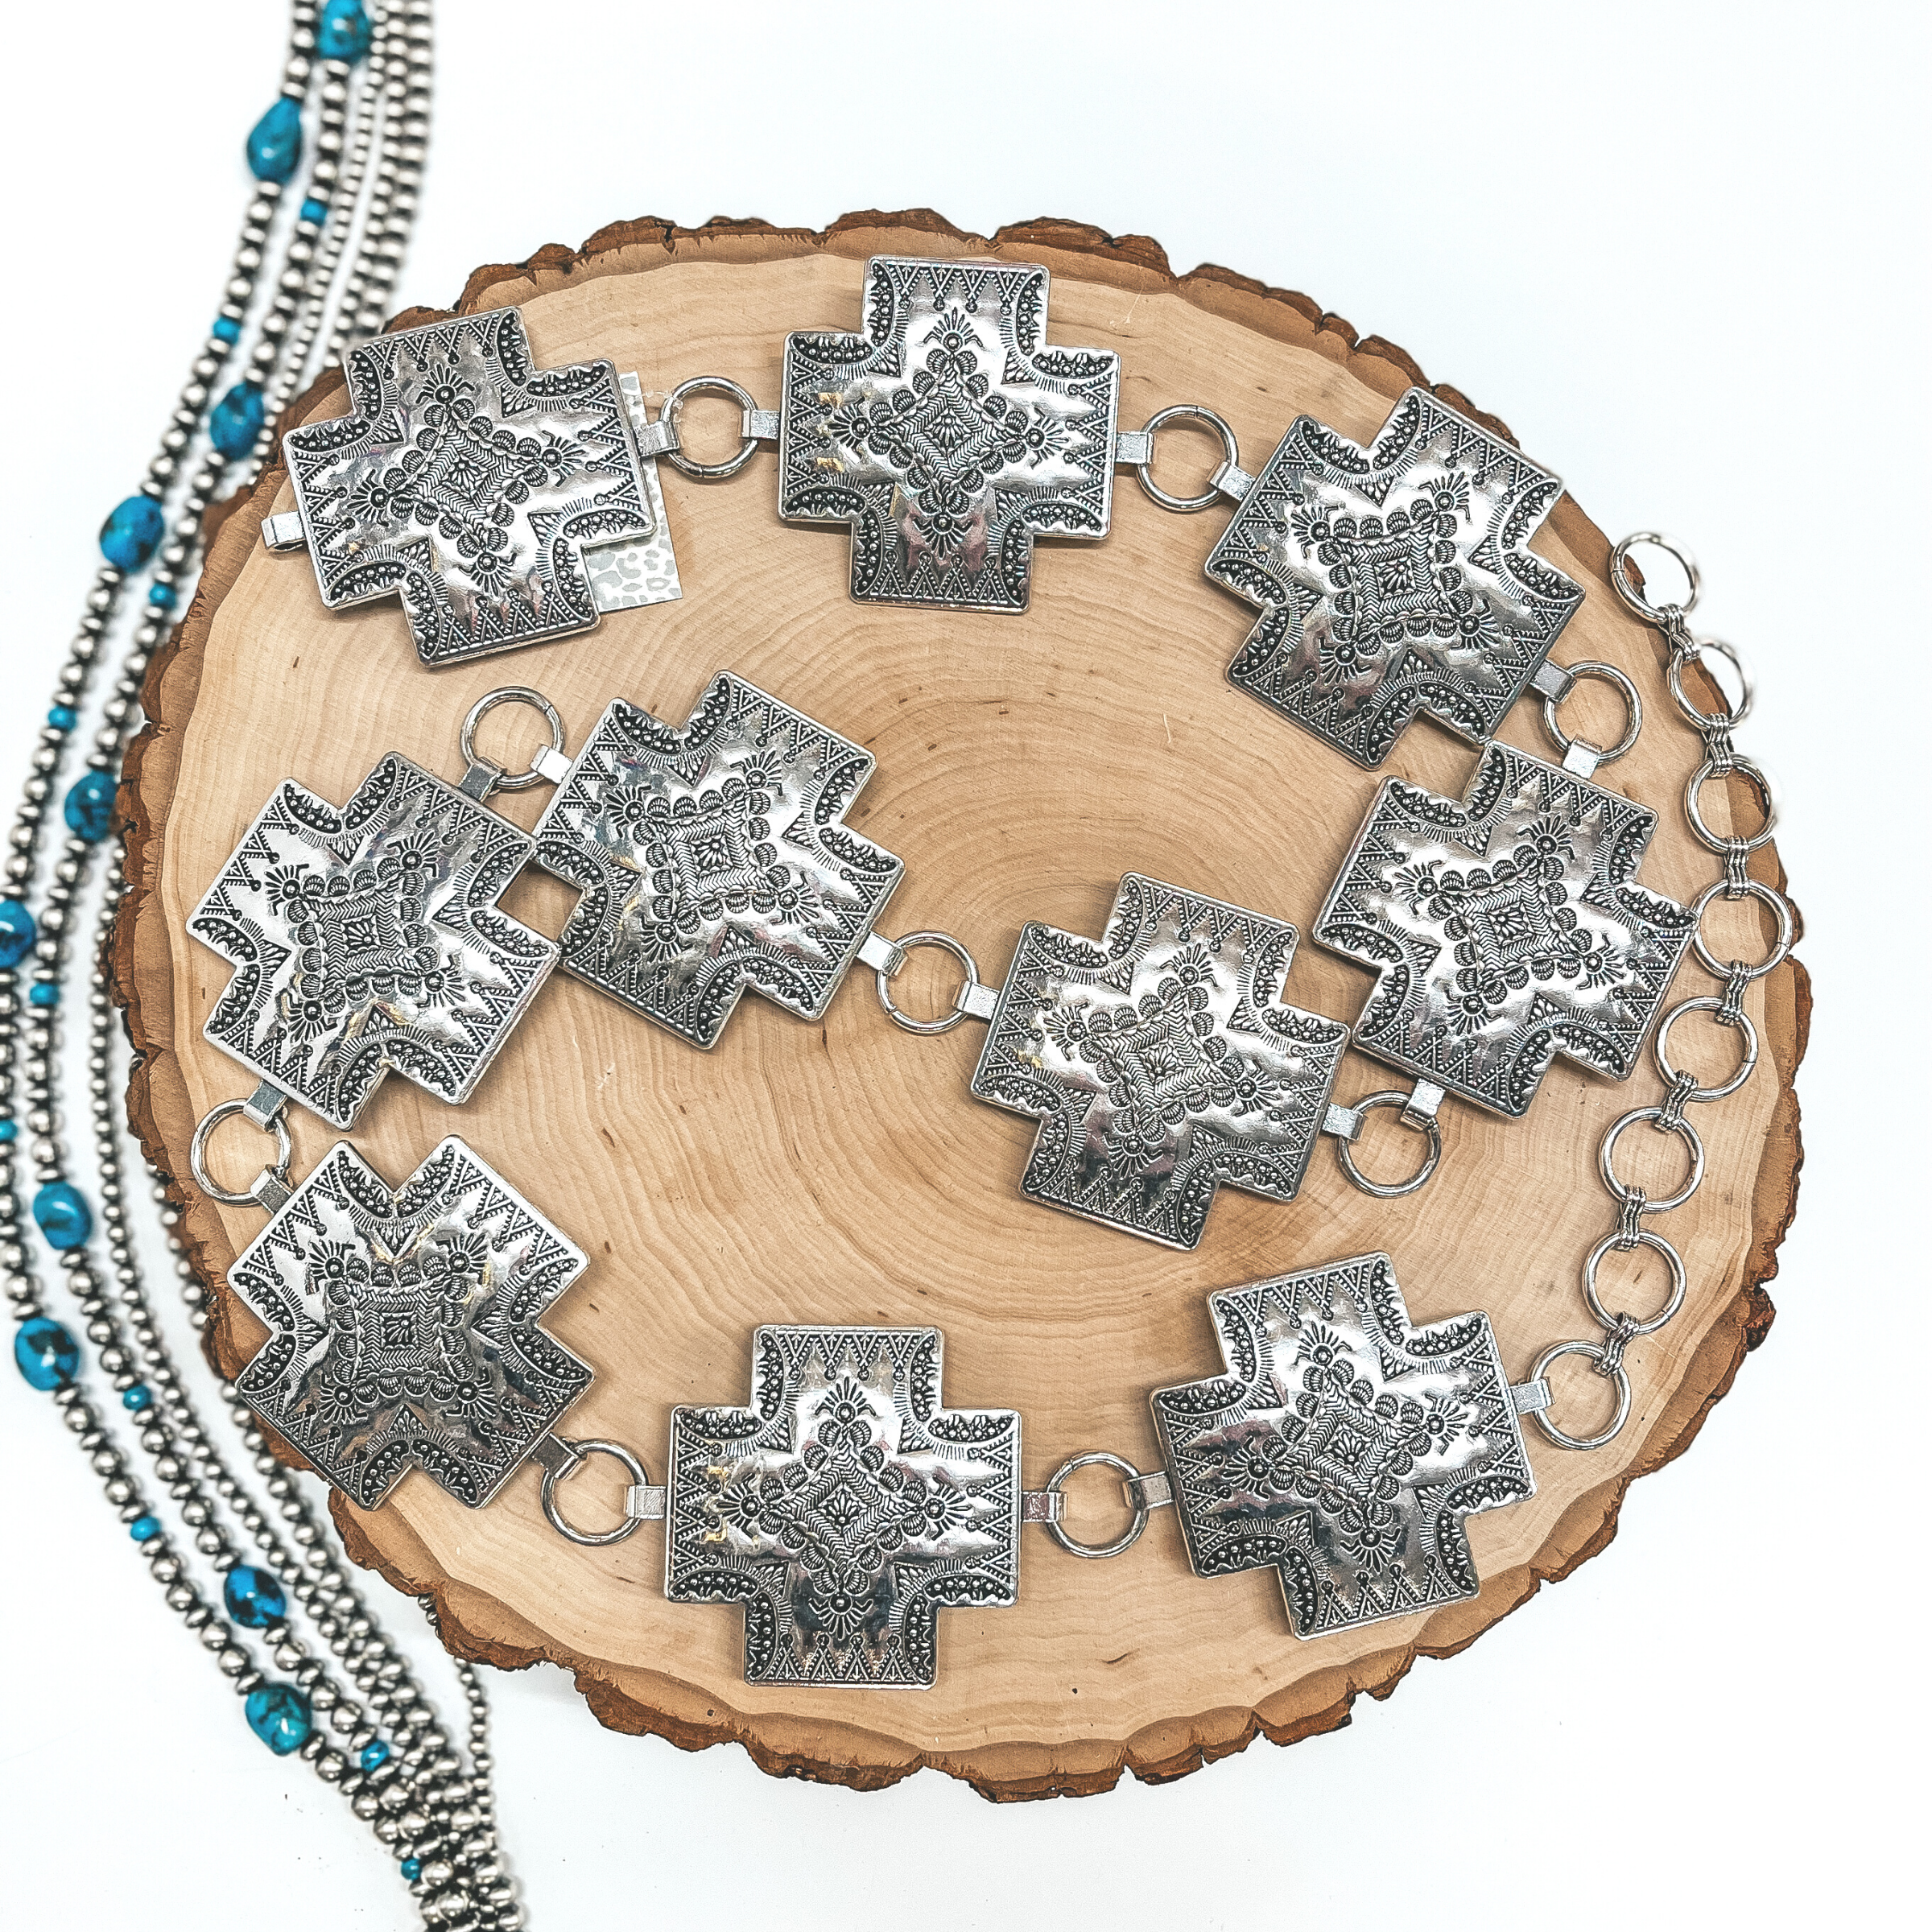 A silver cross concho belt pictured on a wooden display on white background with Navajo pearls